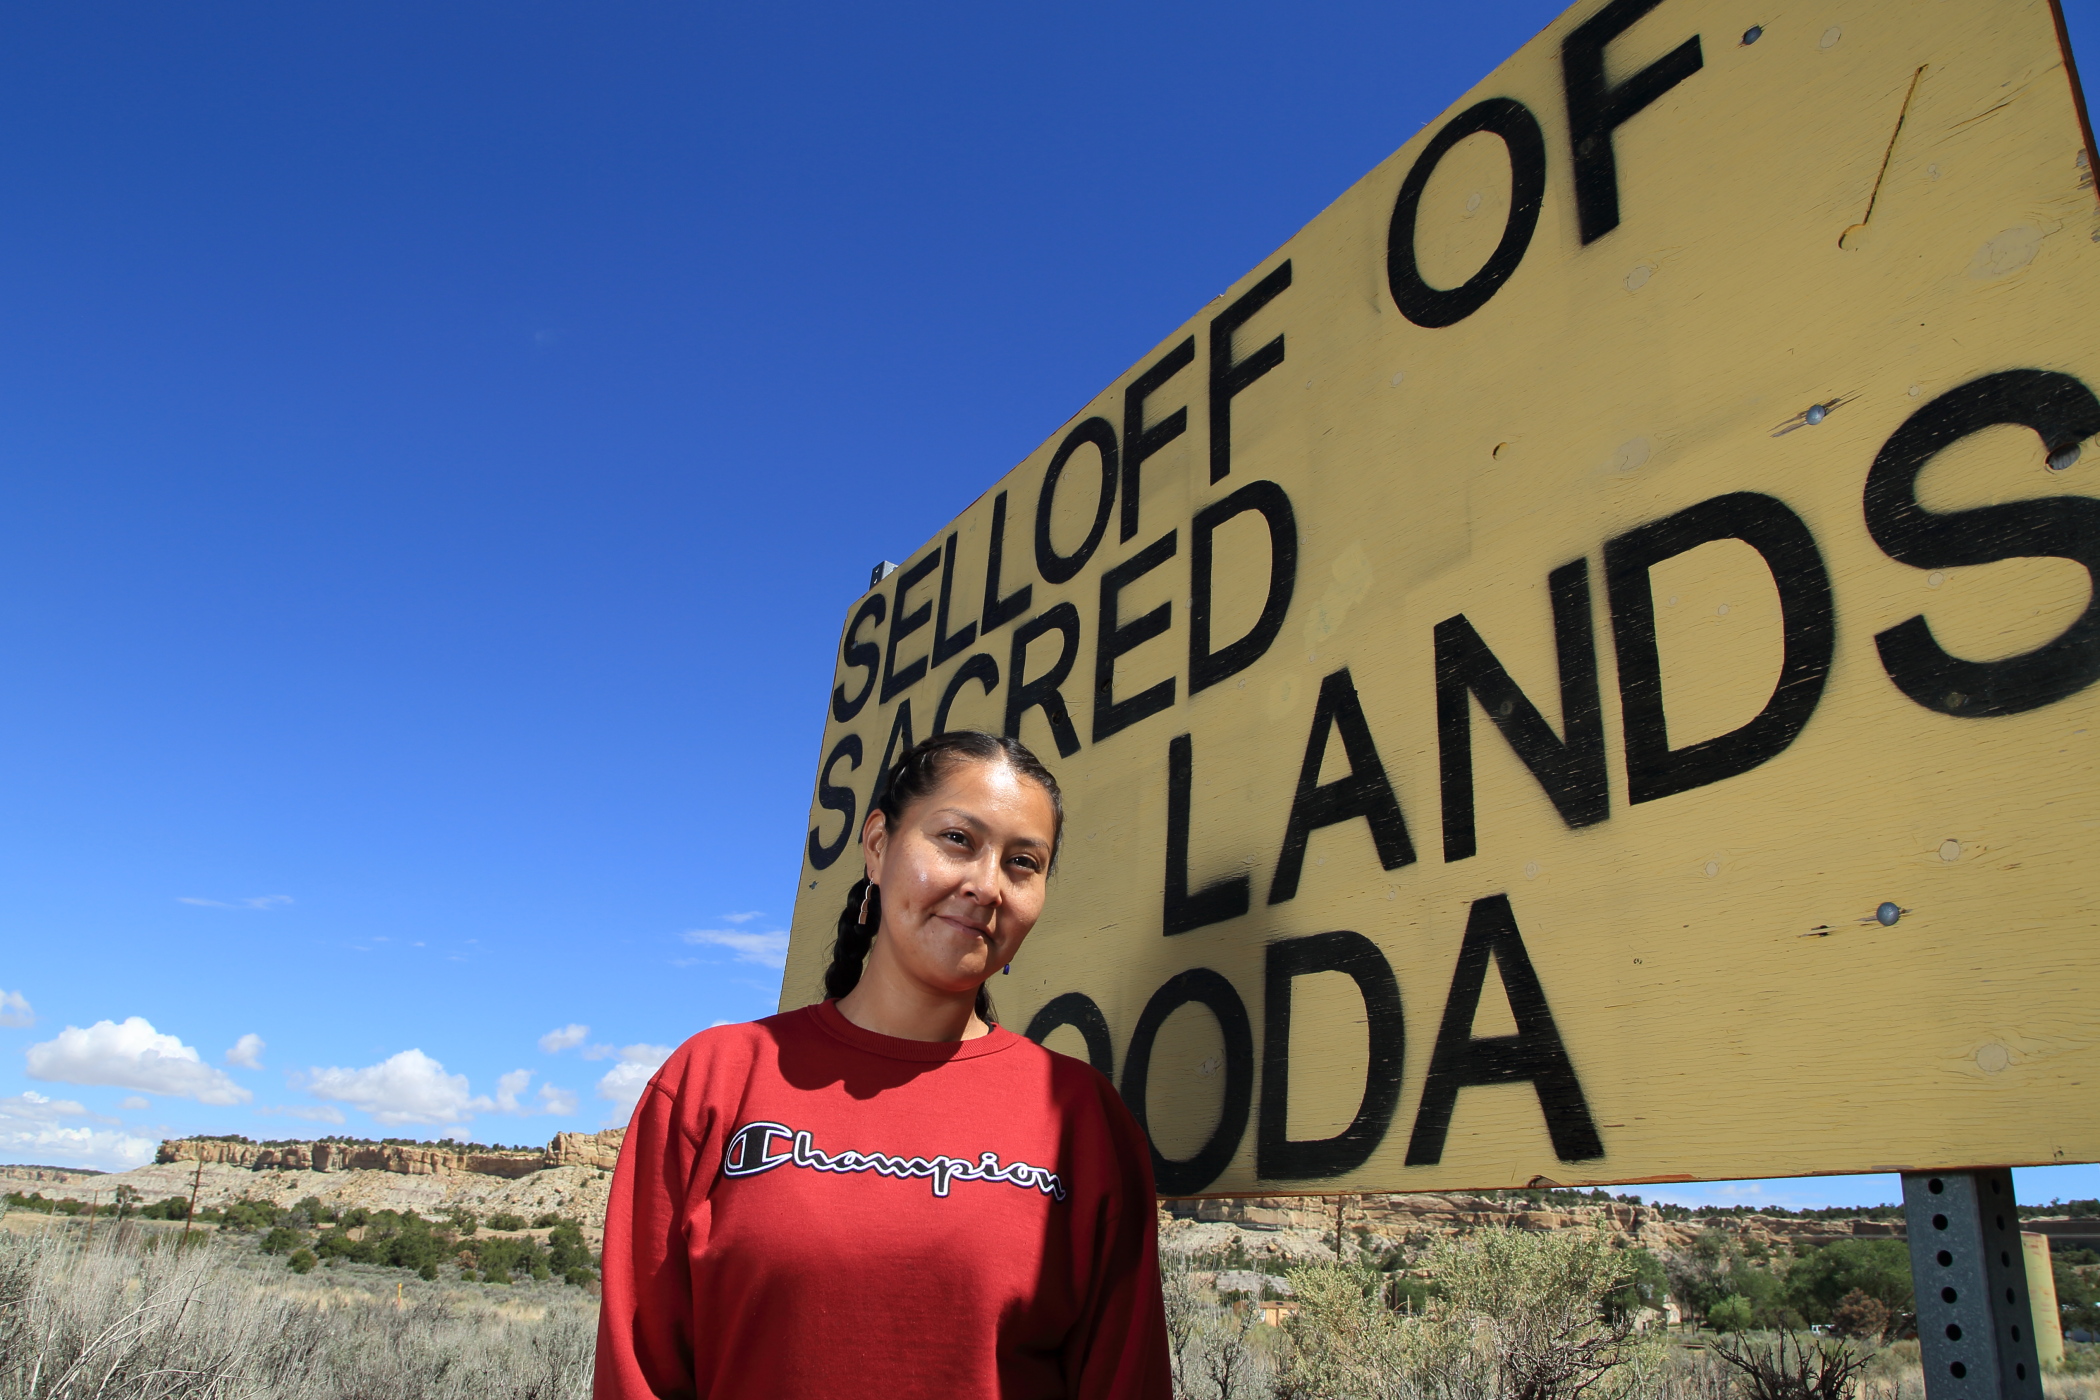 Kendra Pinto of Diné CARE stands beside one of several protest signs (“dooda” means “no” in Navajo) that she and colleagues erected along US Route 550 in Greater Chaco.